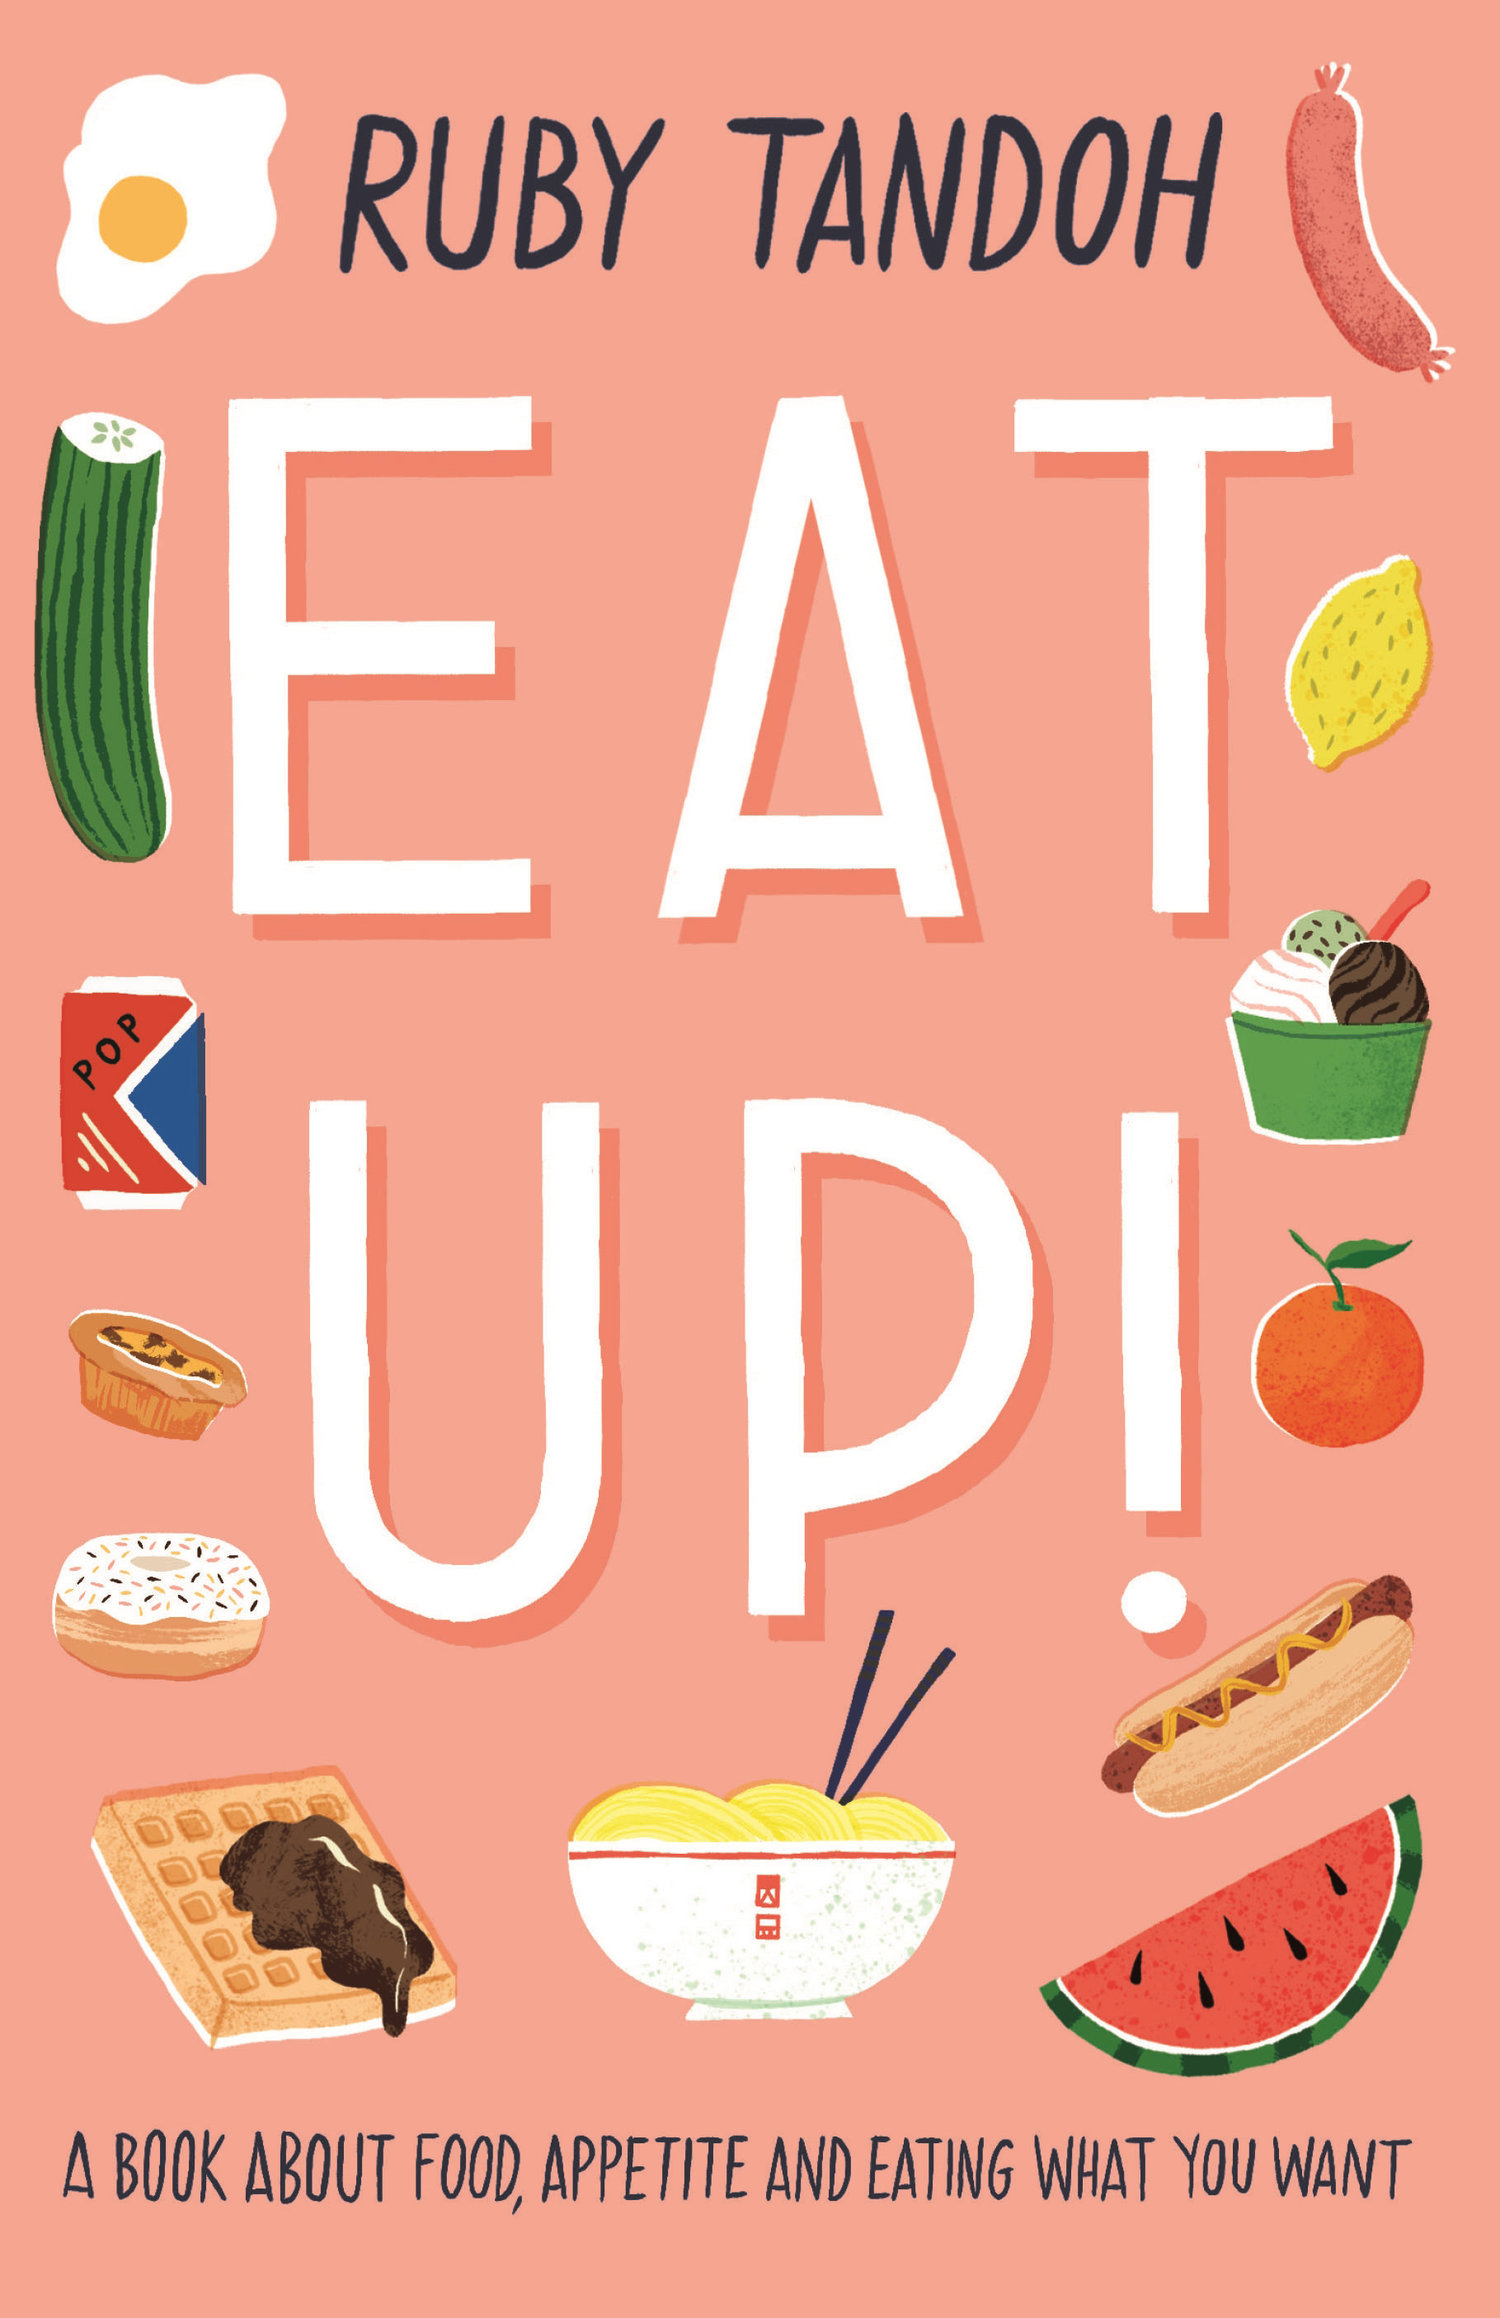 We eat перевод. Ruby Tandoh. Ruby книга. What eating?. You are what you eat.